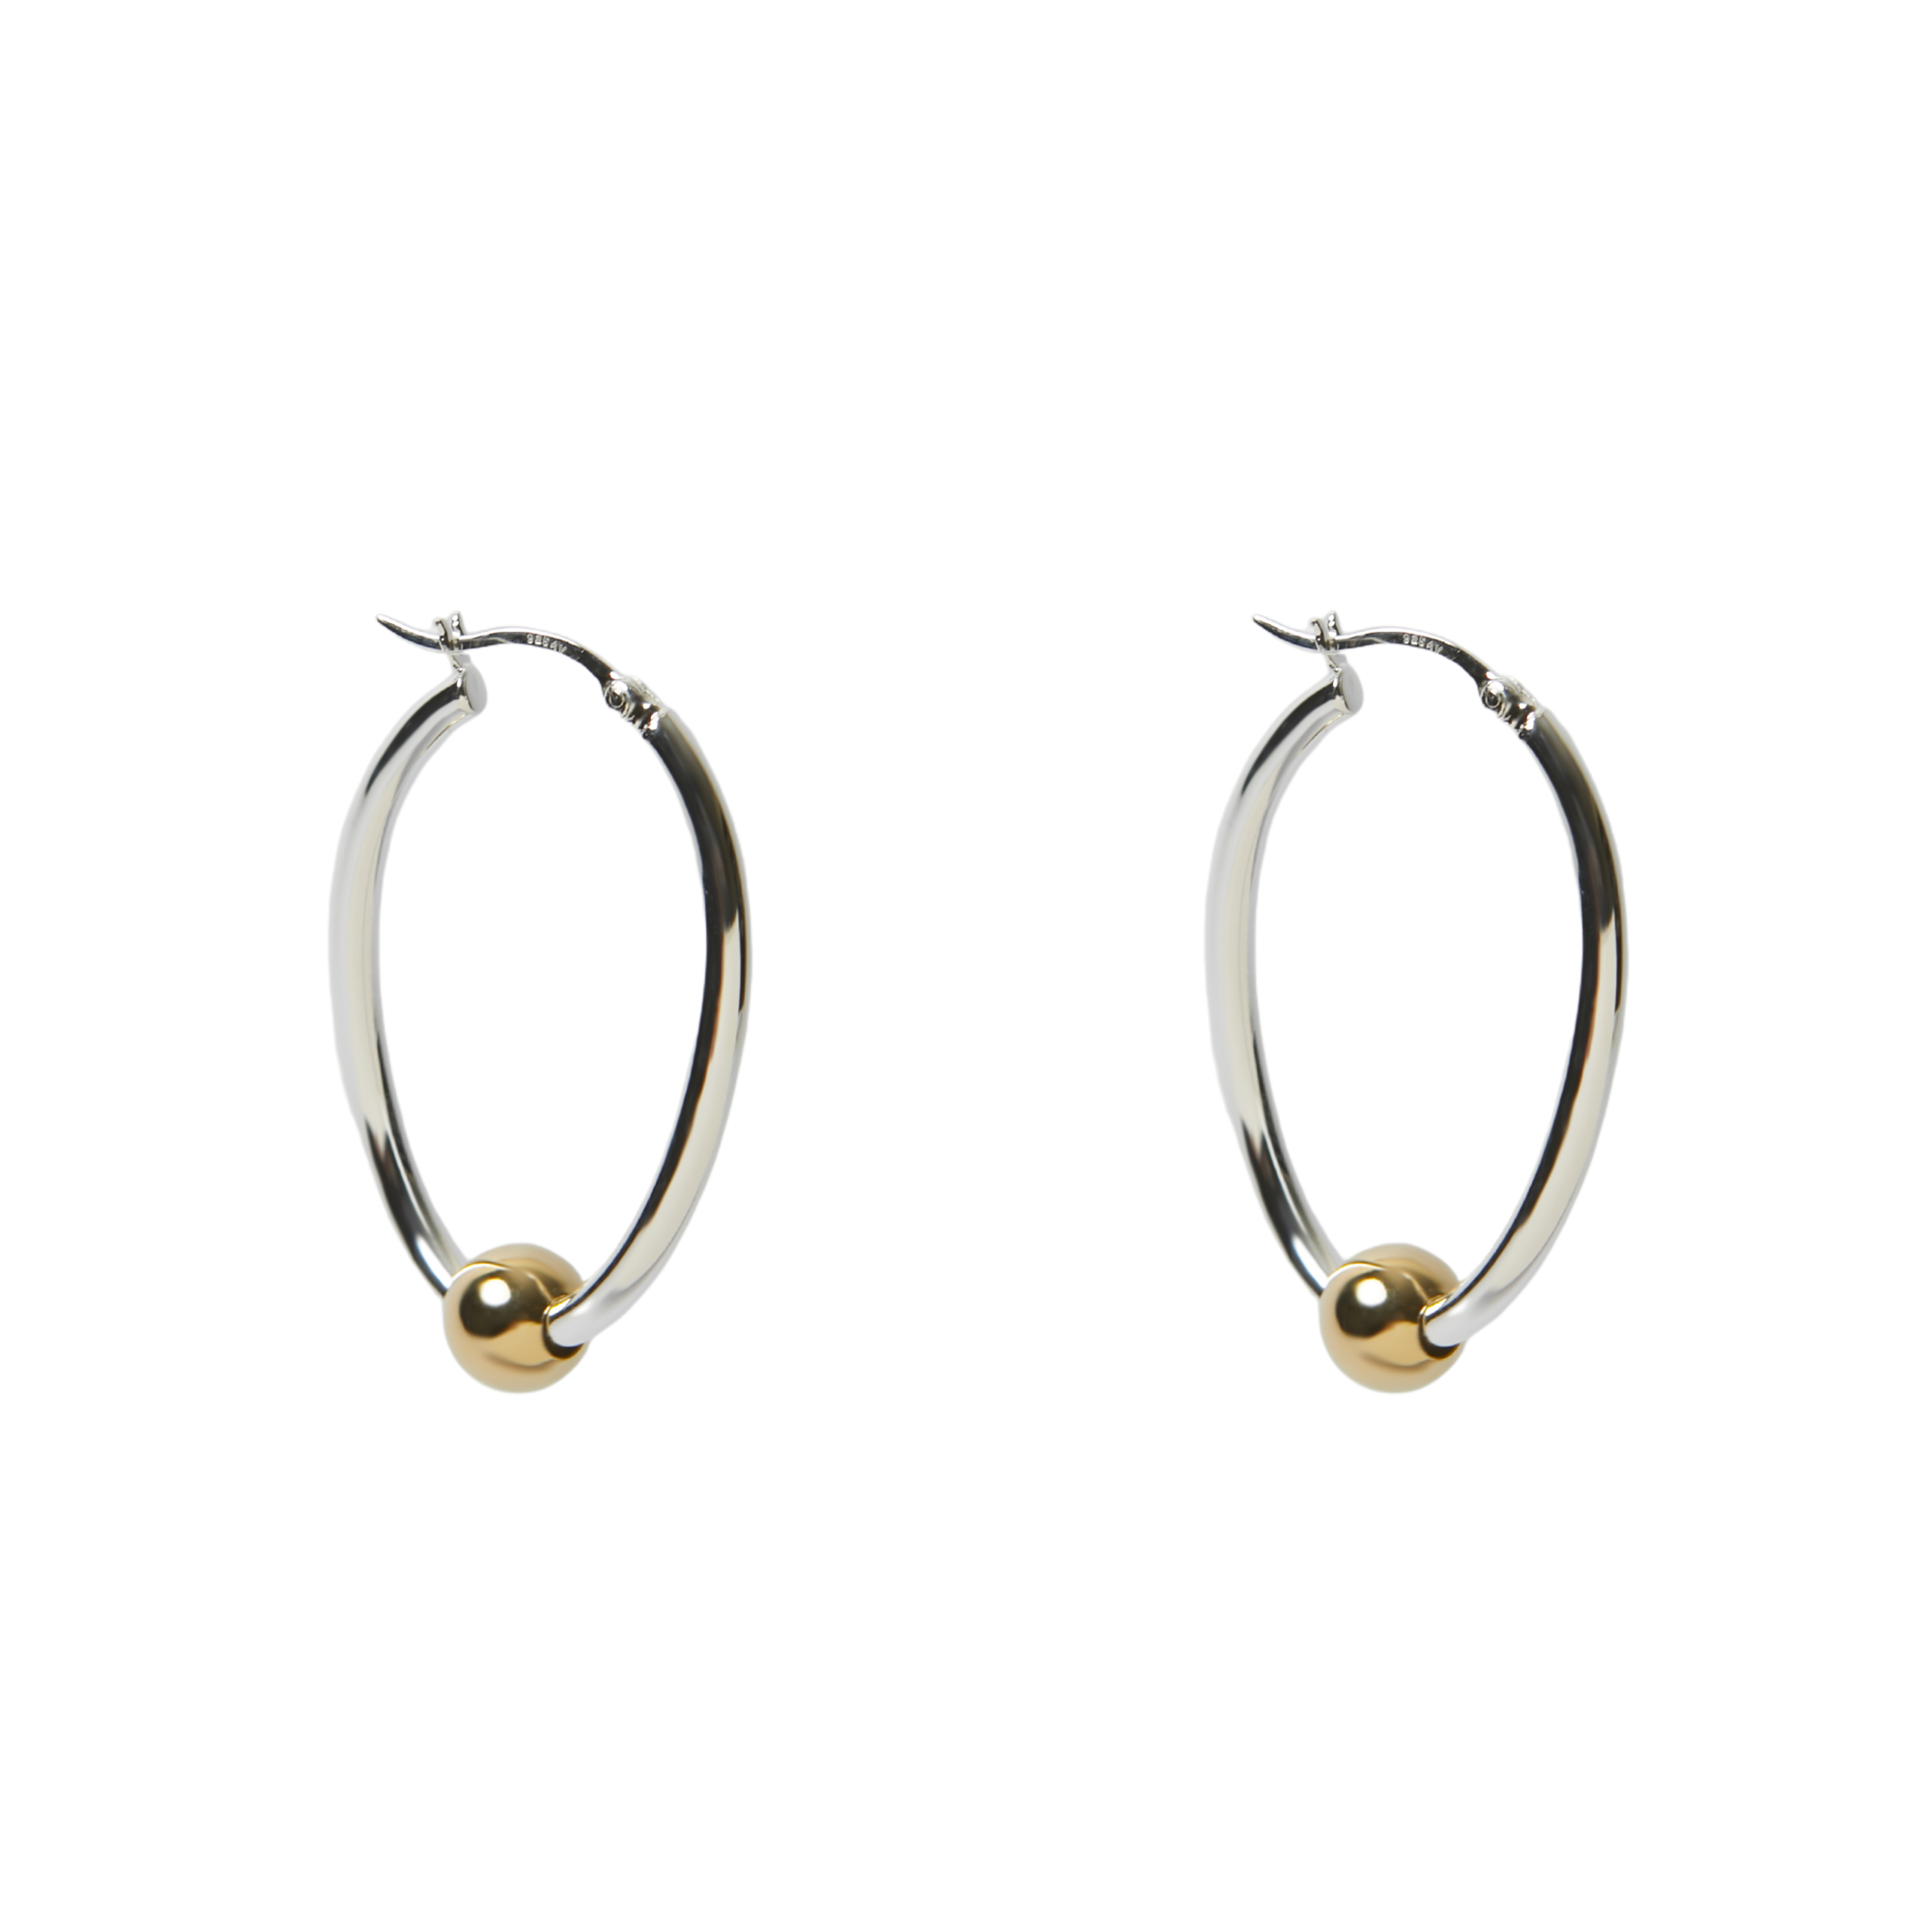 THE TWO TONED OVAL BALL HOOPS